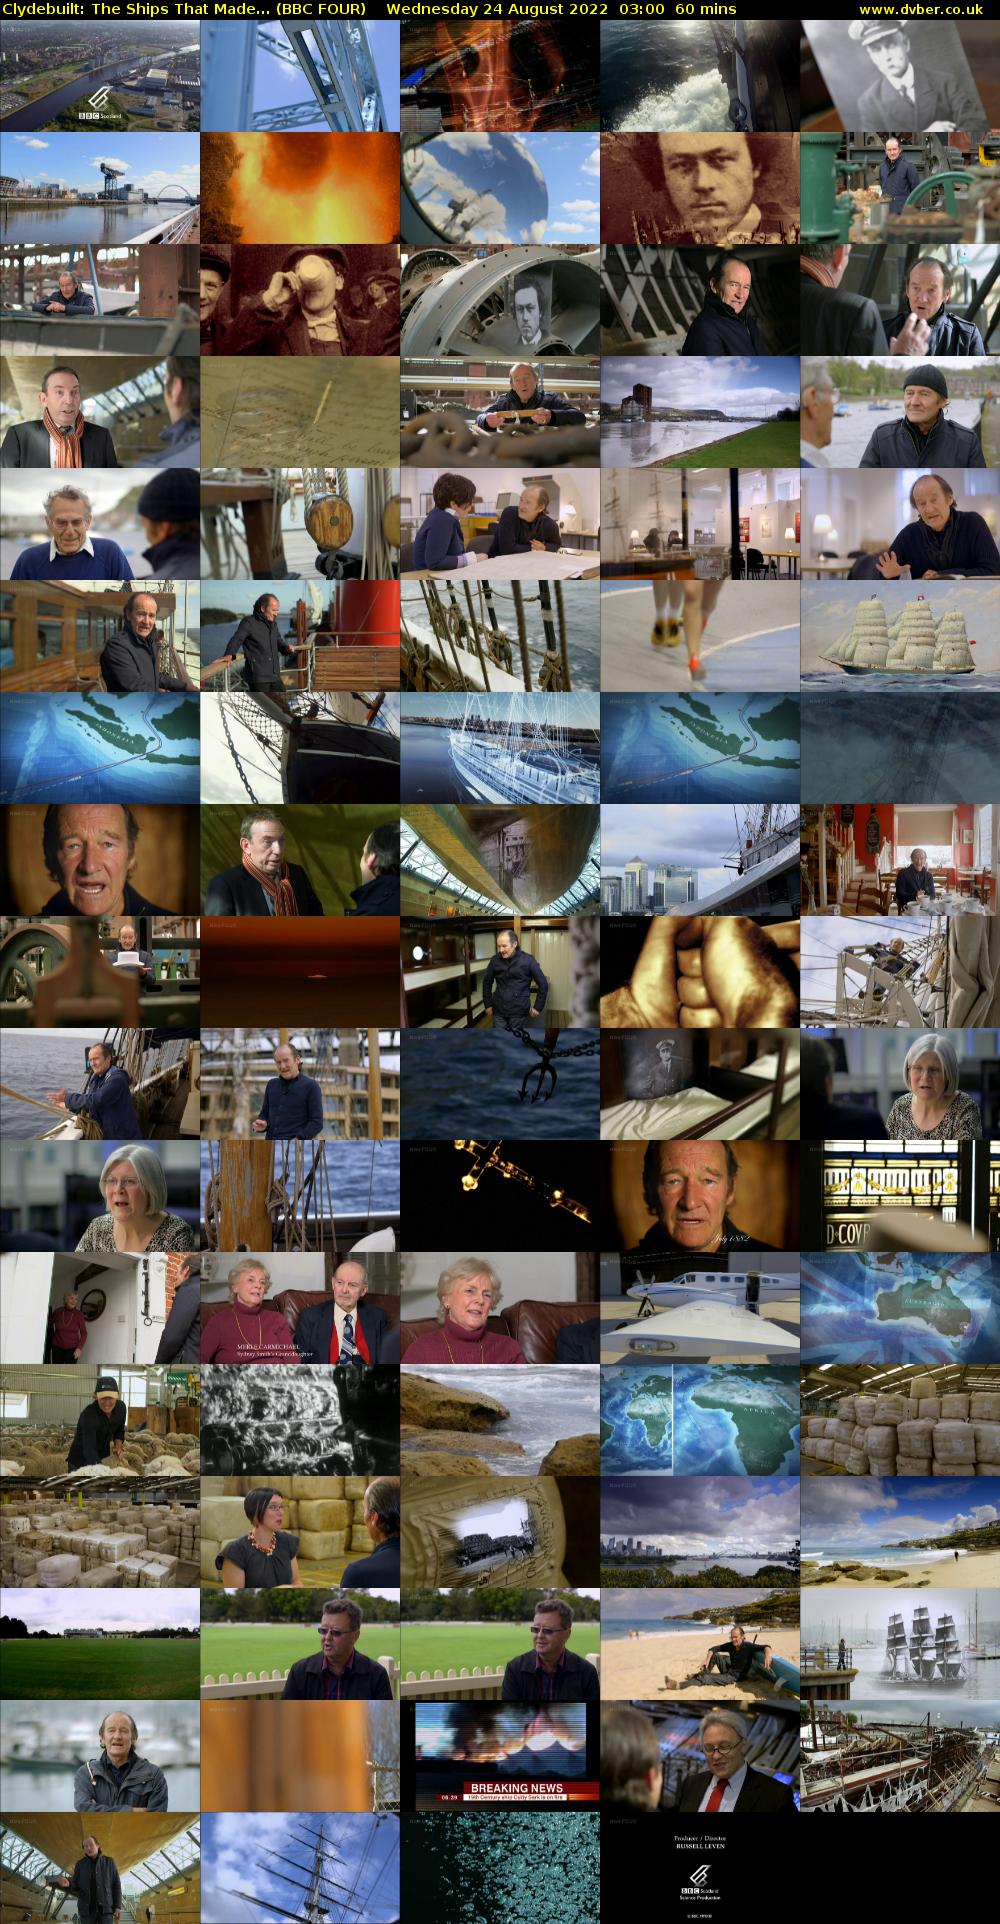 Clydebuilt: The Ships That Made... (BBC FOUR) Wednesday 24 August 2022 03:00 - 04:00